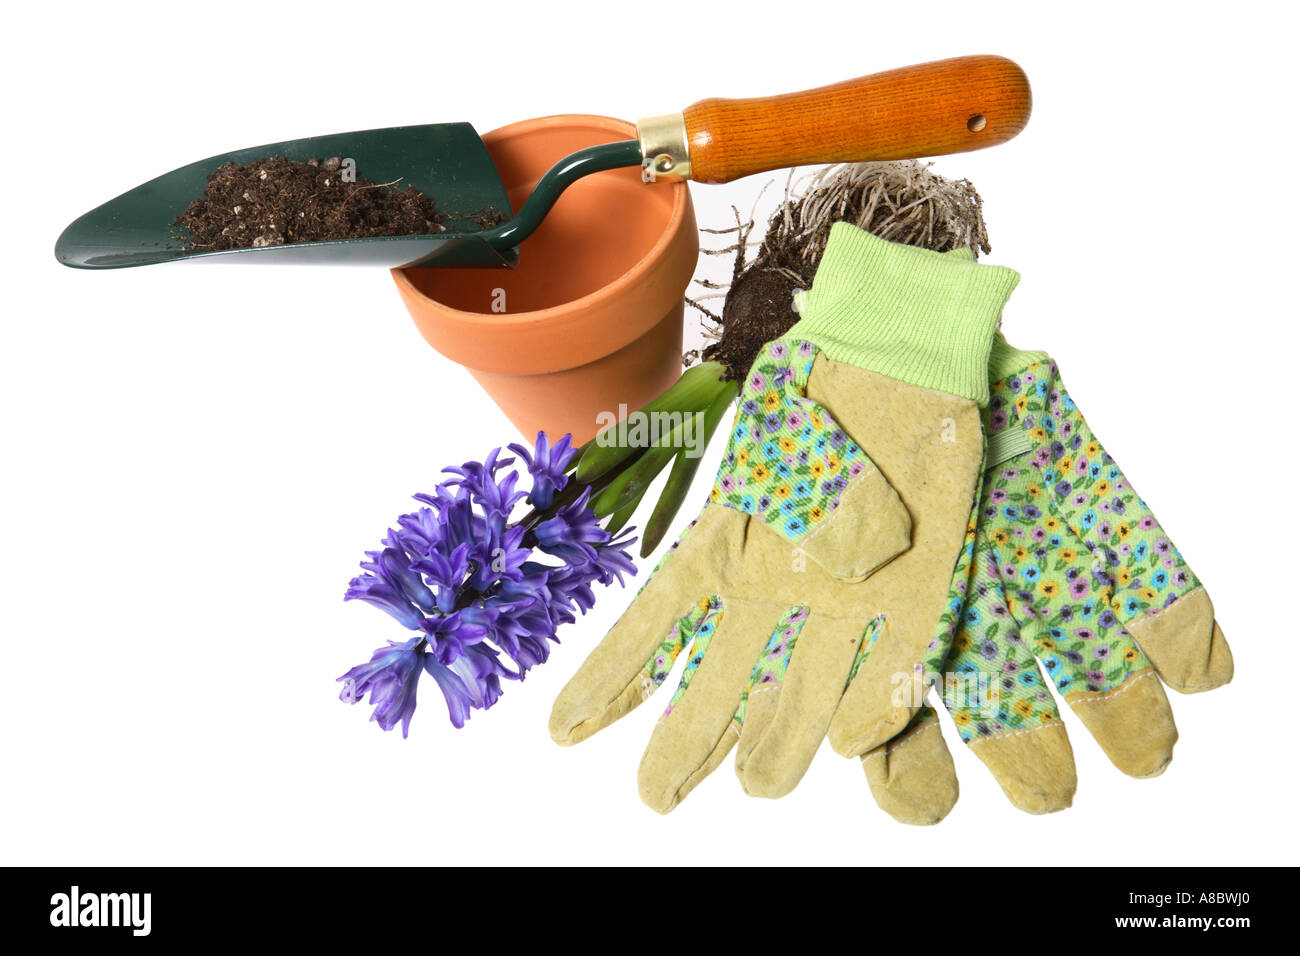 Gardening gloves and tools Stock Photo